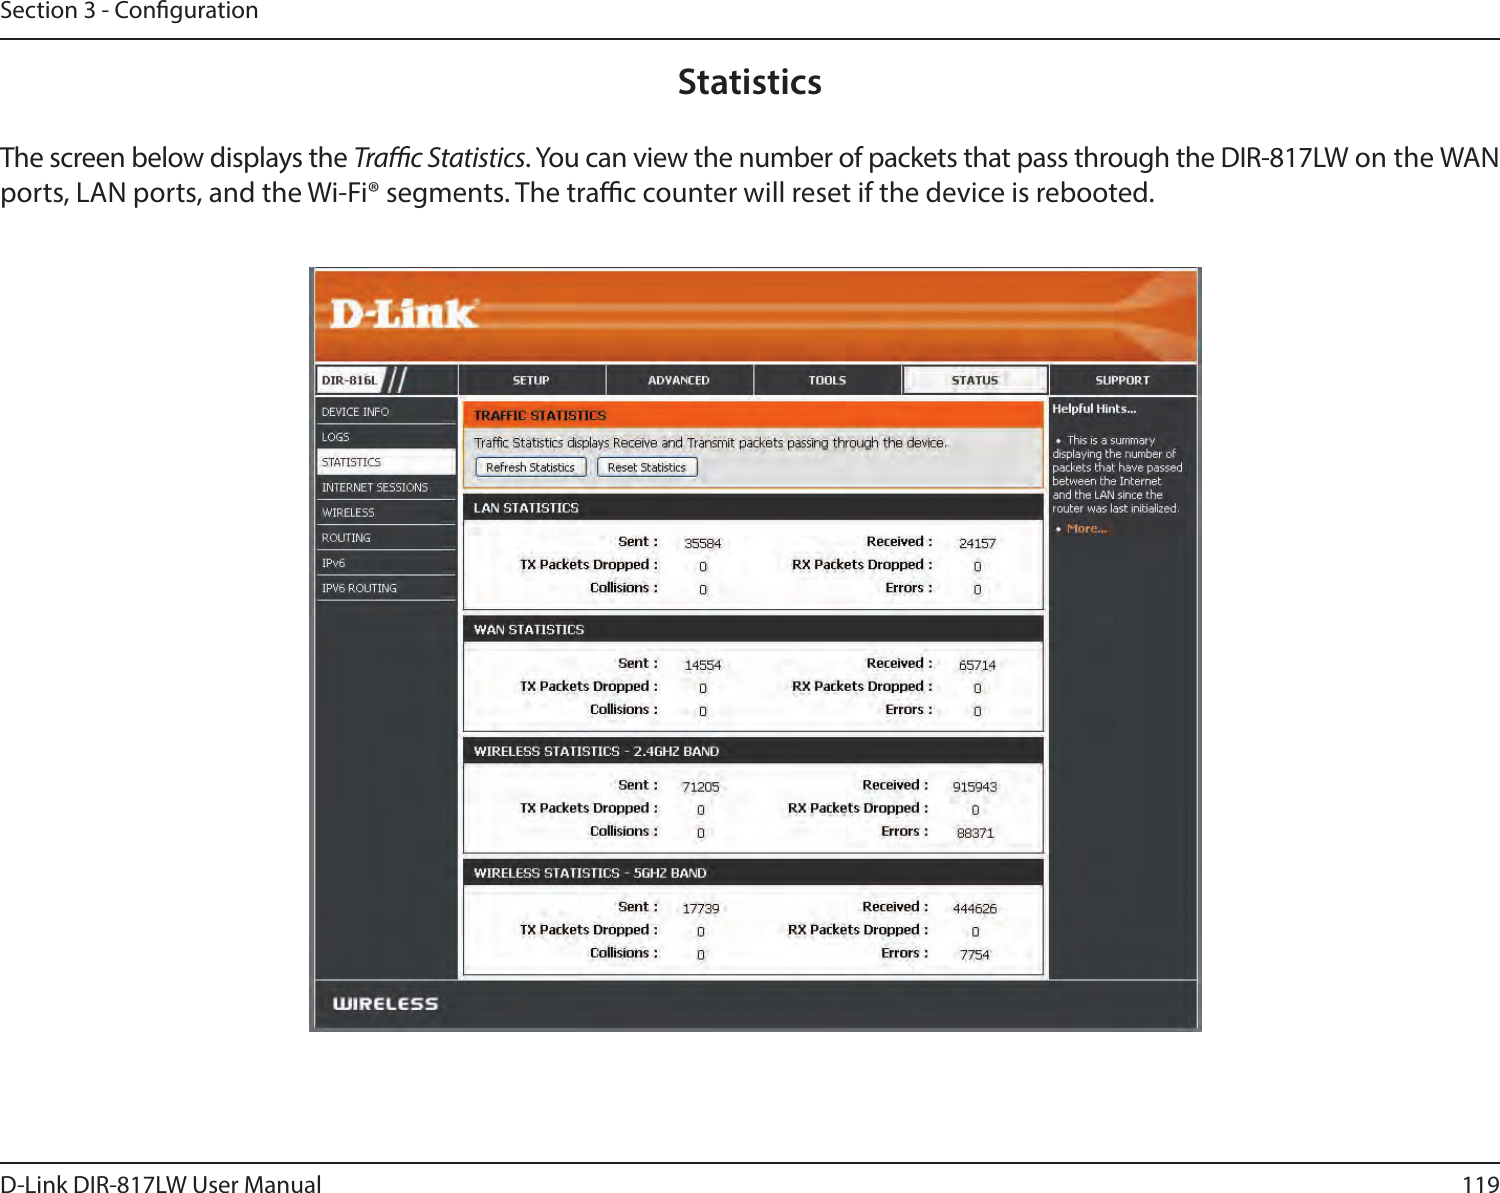 119D-Link DIR-817LW User ManualSection 3 - CongurationStatisticsThe screen below displays the Trac Statistics. You can view the number of packets that pass through the DIR-817LW on the WAN ports, LAN ports, and the Wi-Fi® segments. The trac counter will reset if the device is rebooted.